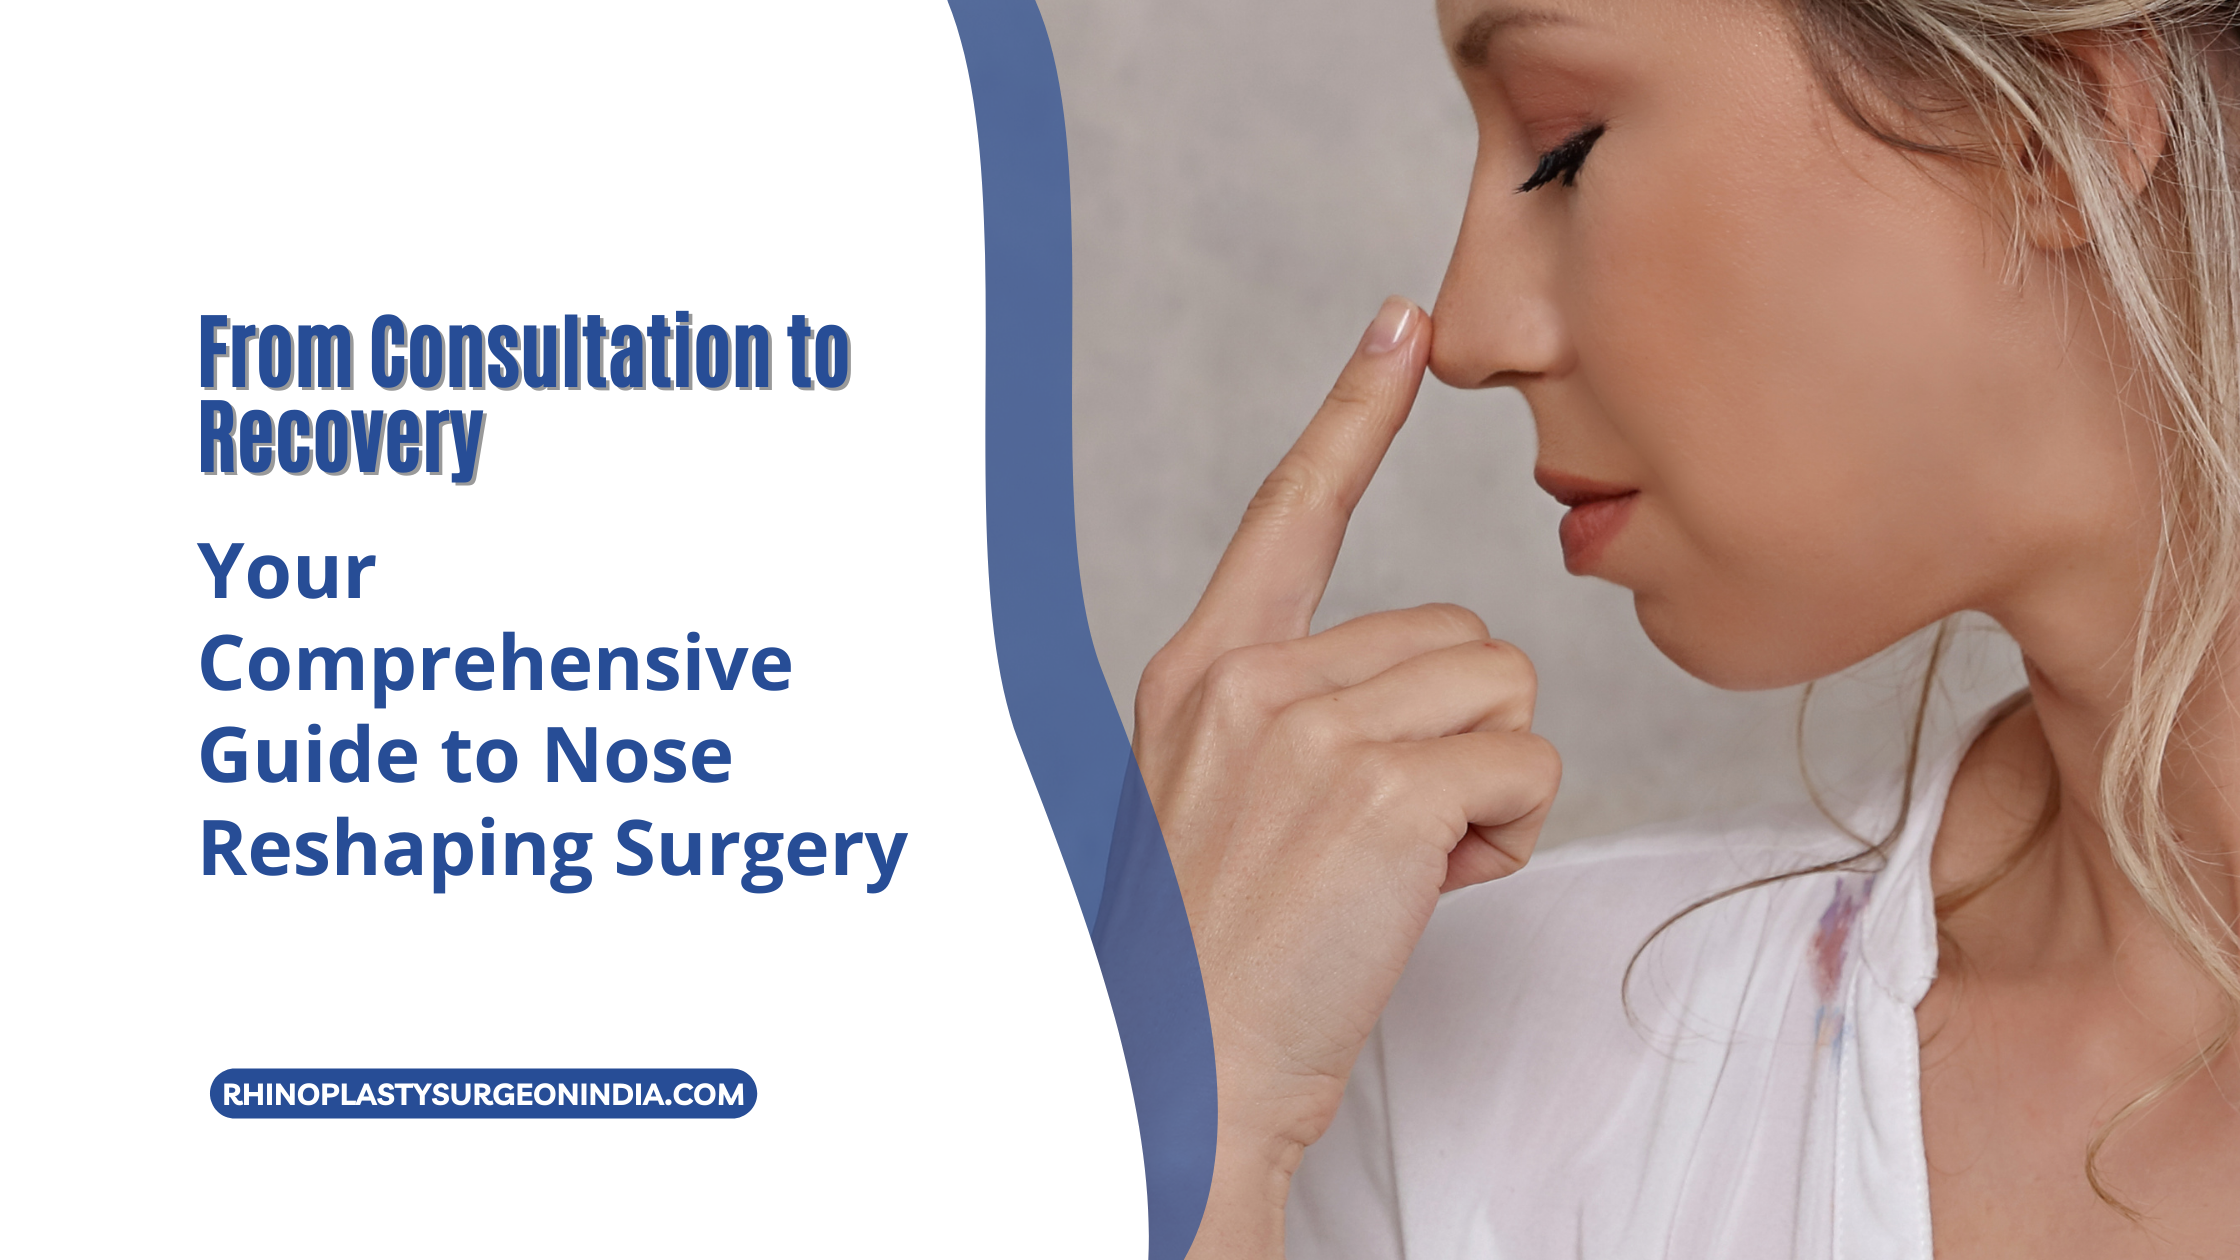 From Consultation to Recovery Your Comprehensive Guide to Nose Reshaping Surgery